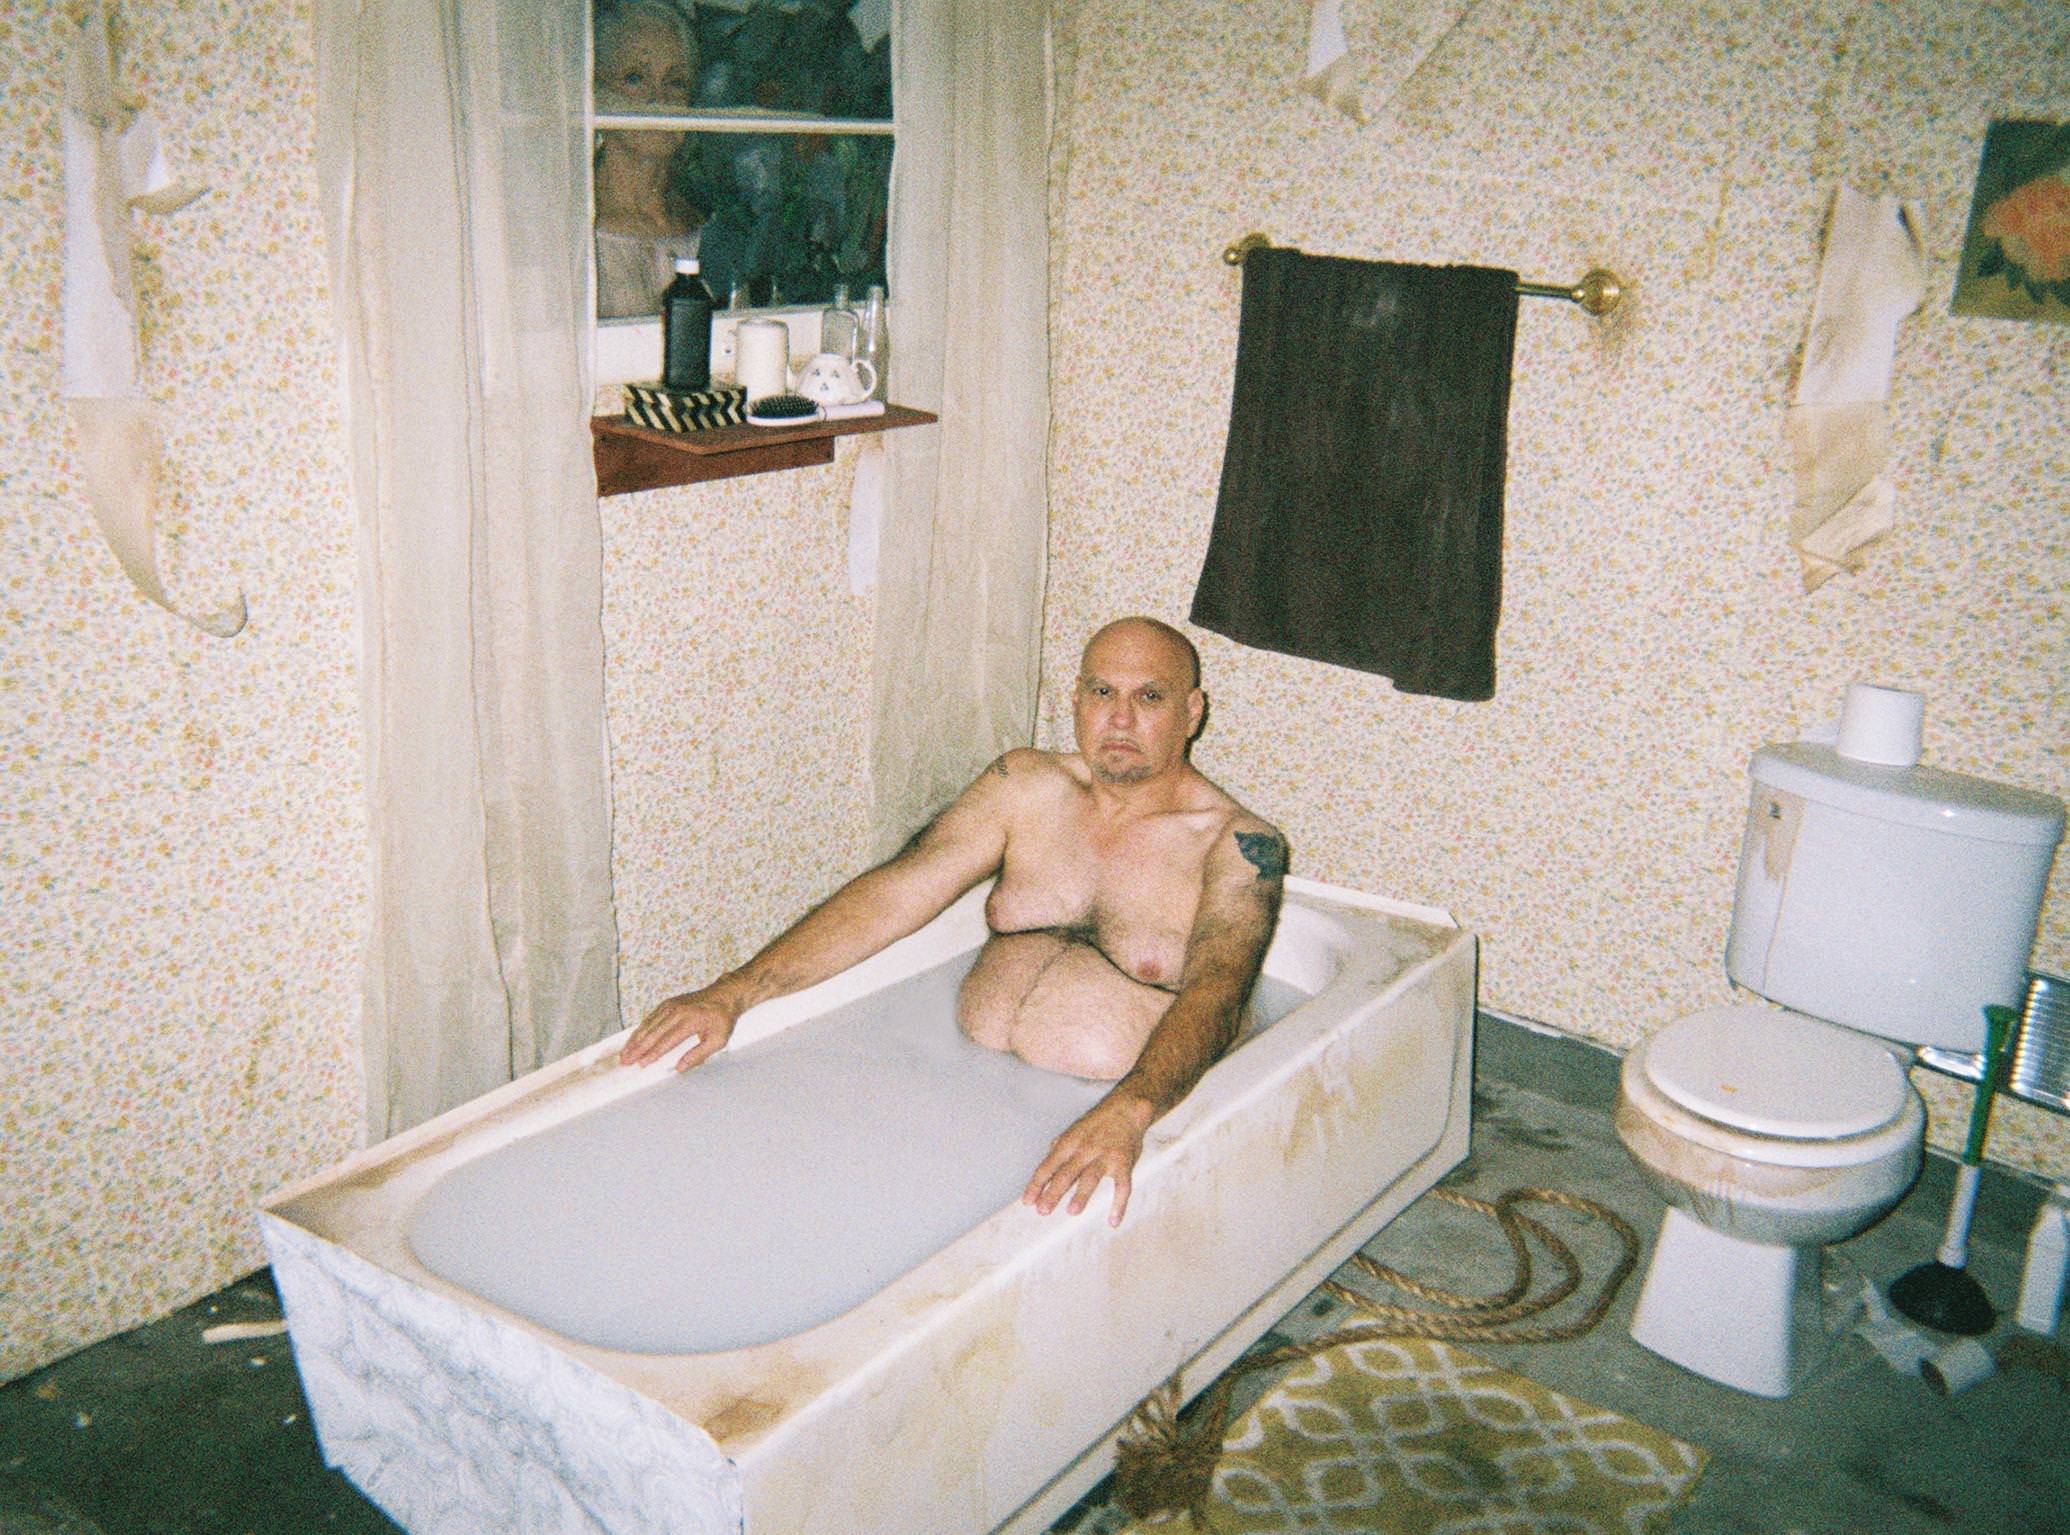 Extremely Creepy Website Poses Men In Tubs Full Of Milk